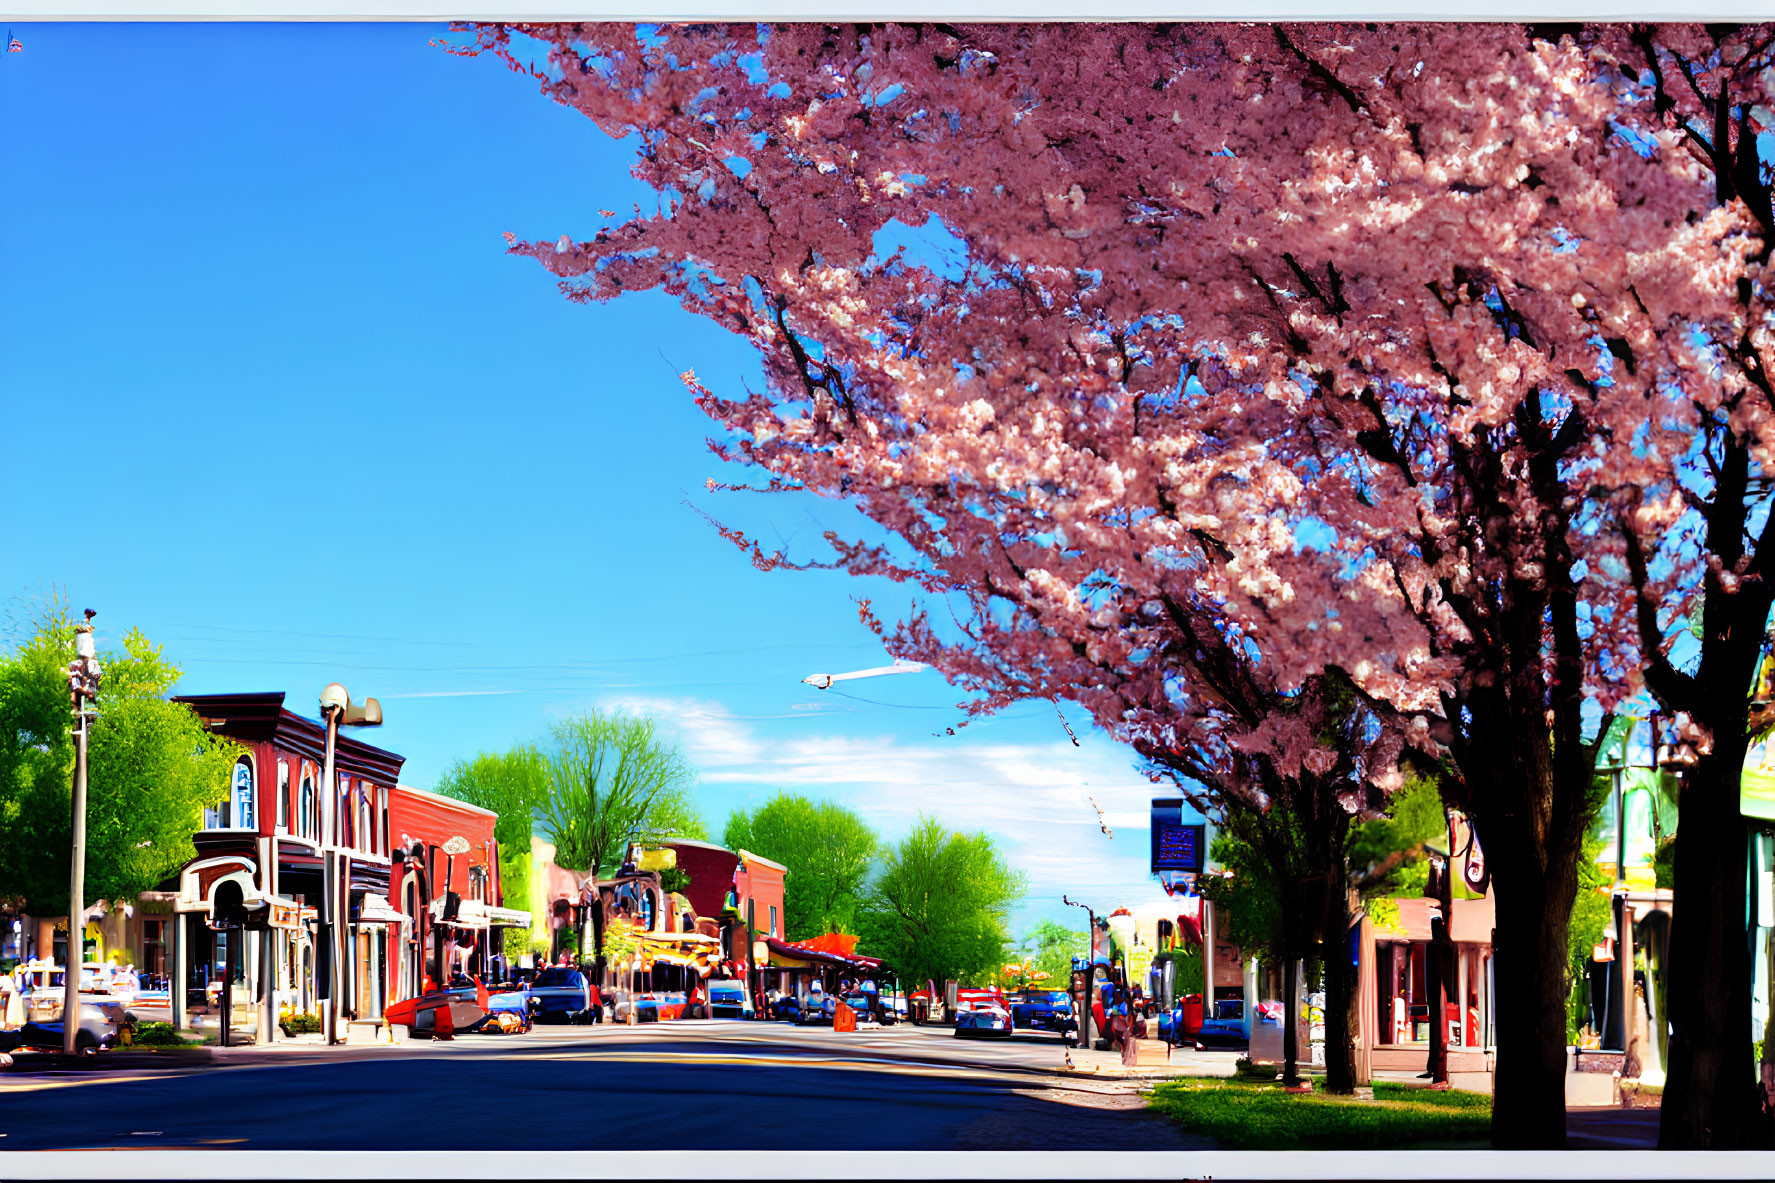 Cherry Blossom-Lined Town Street with Shops and Cars